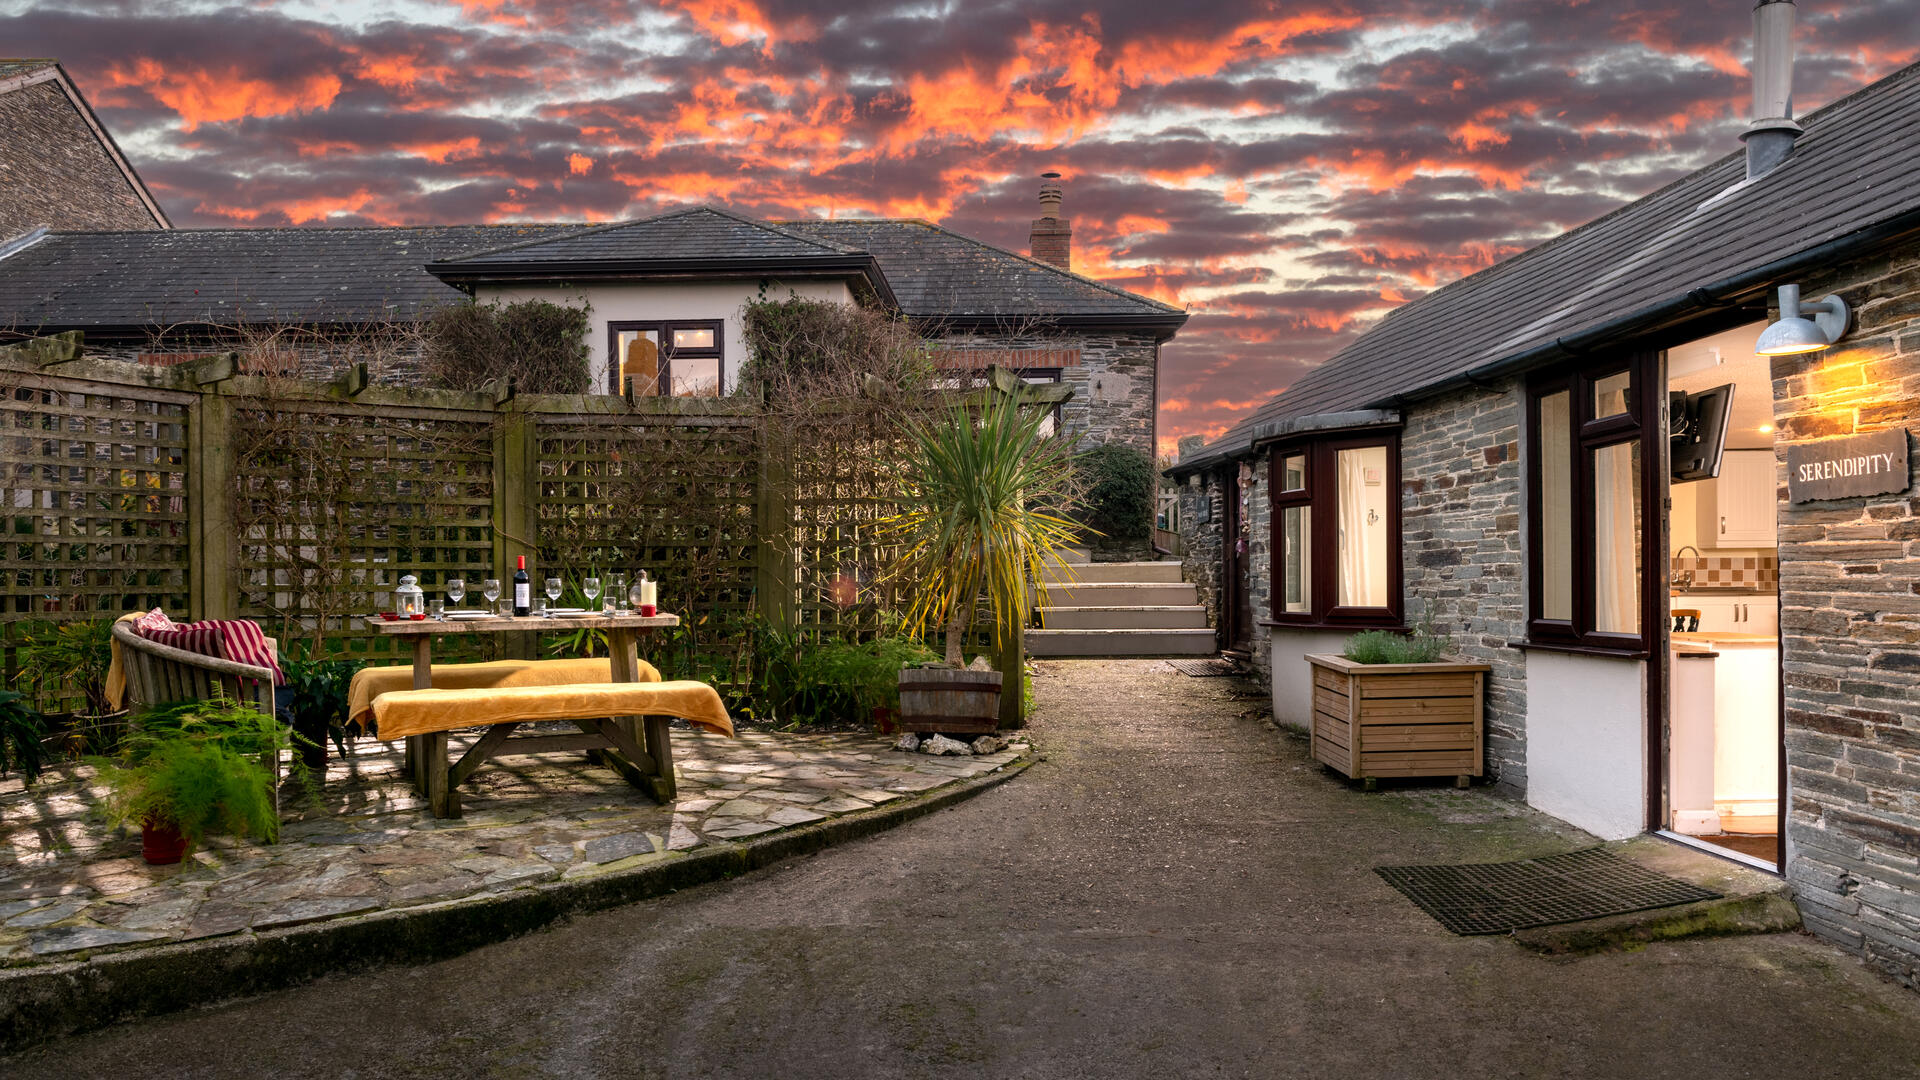 2 Bedroom Cottage/shared facilities in Cornwall, United Kingdom